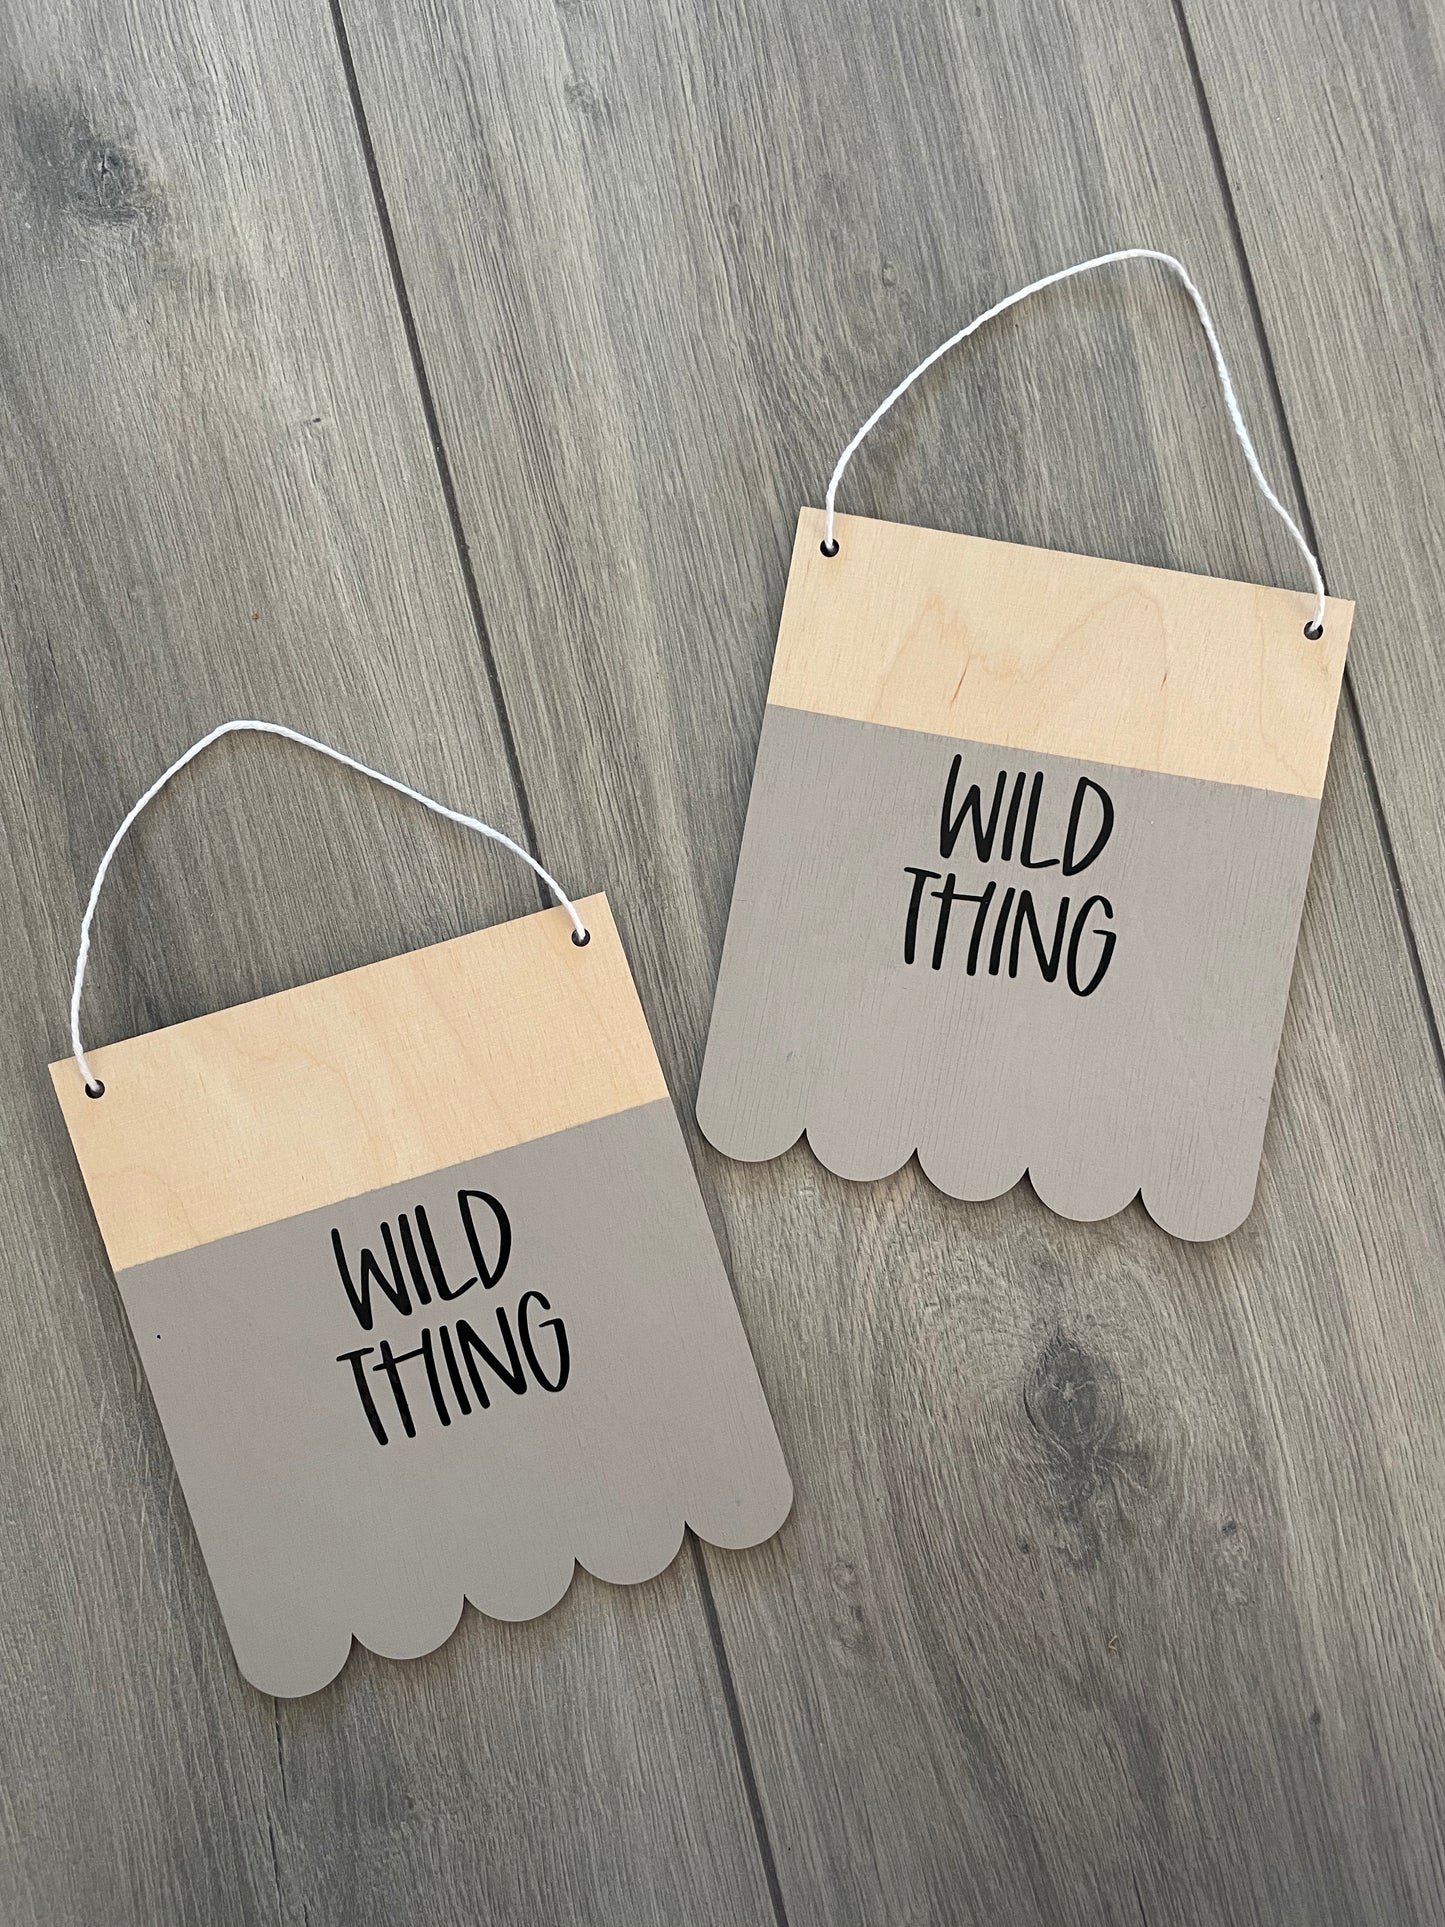 ‘Wild thing’ wooden plaque